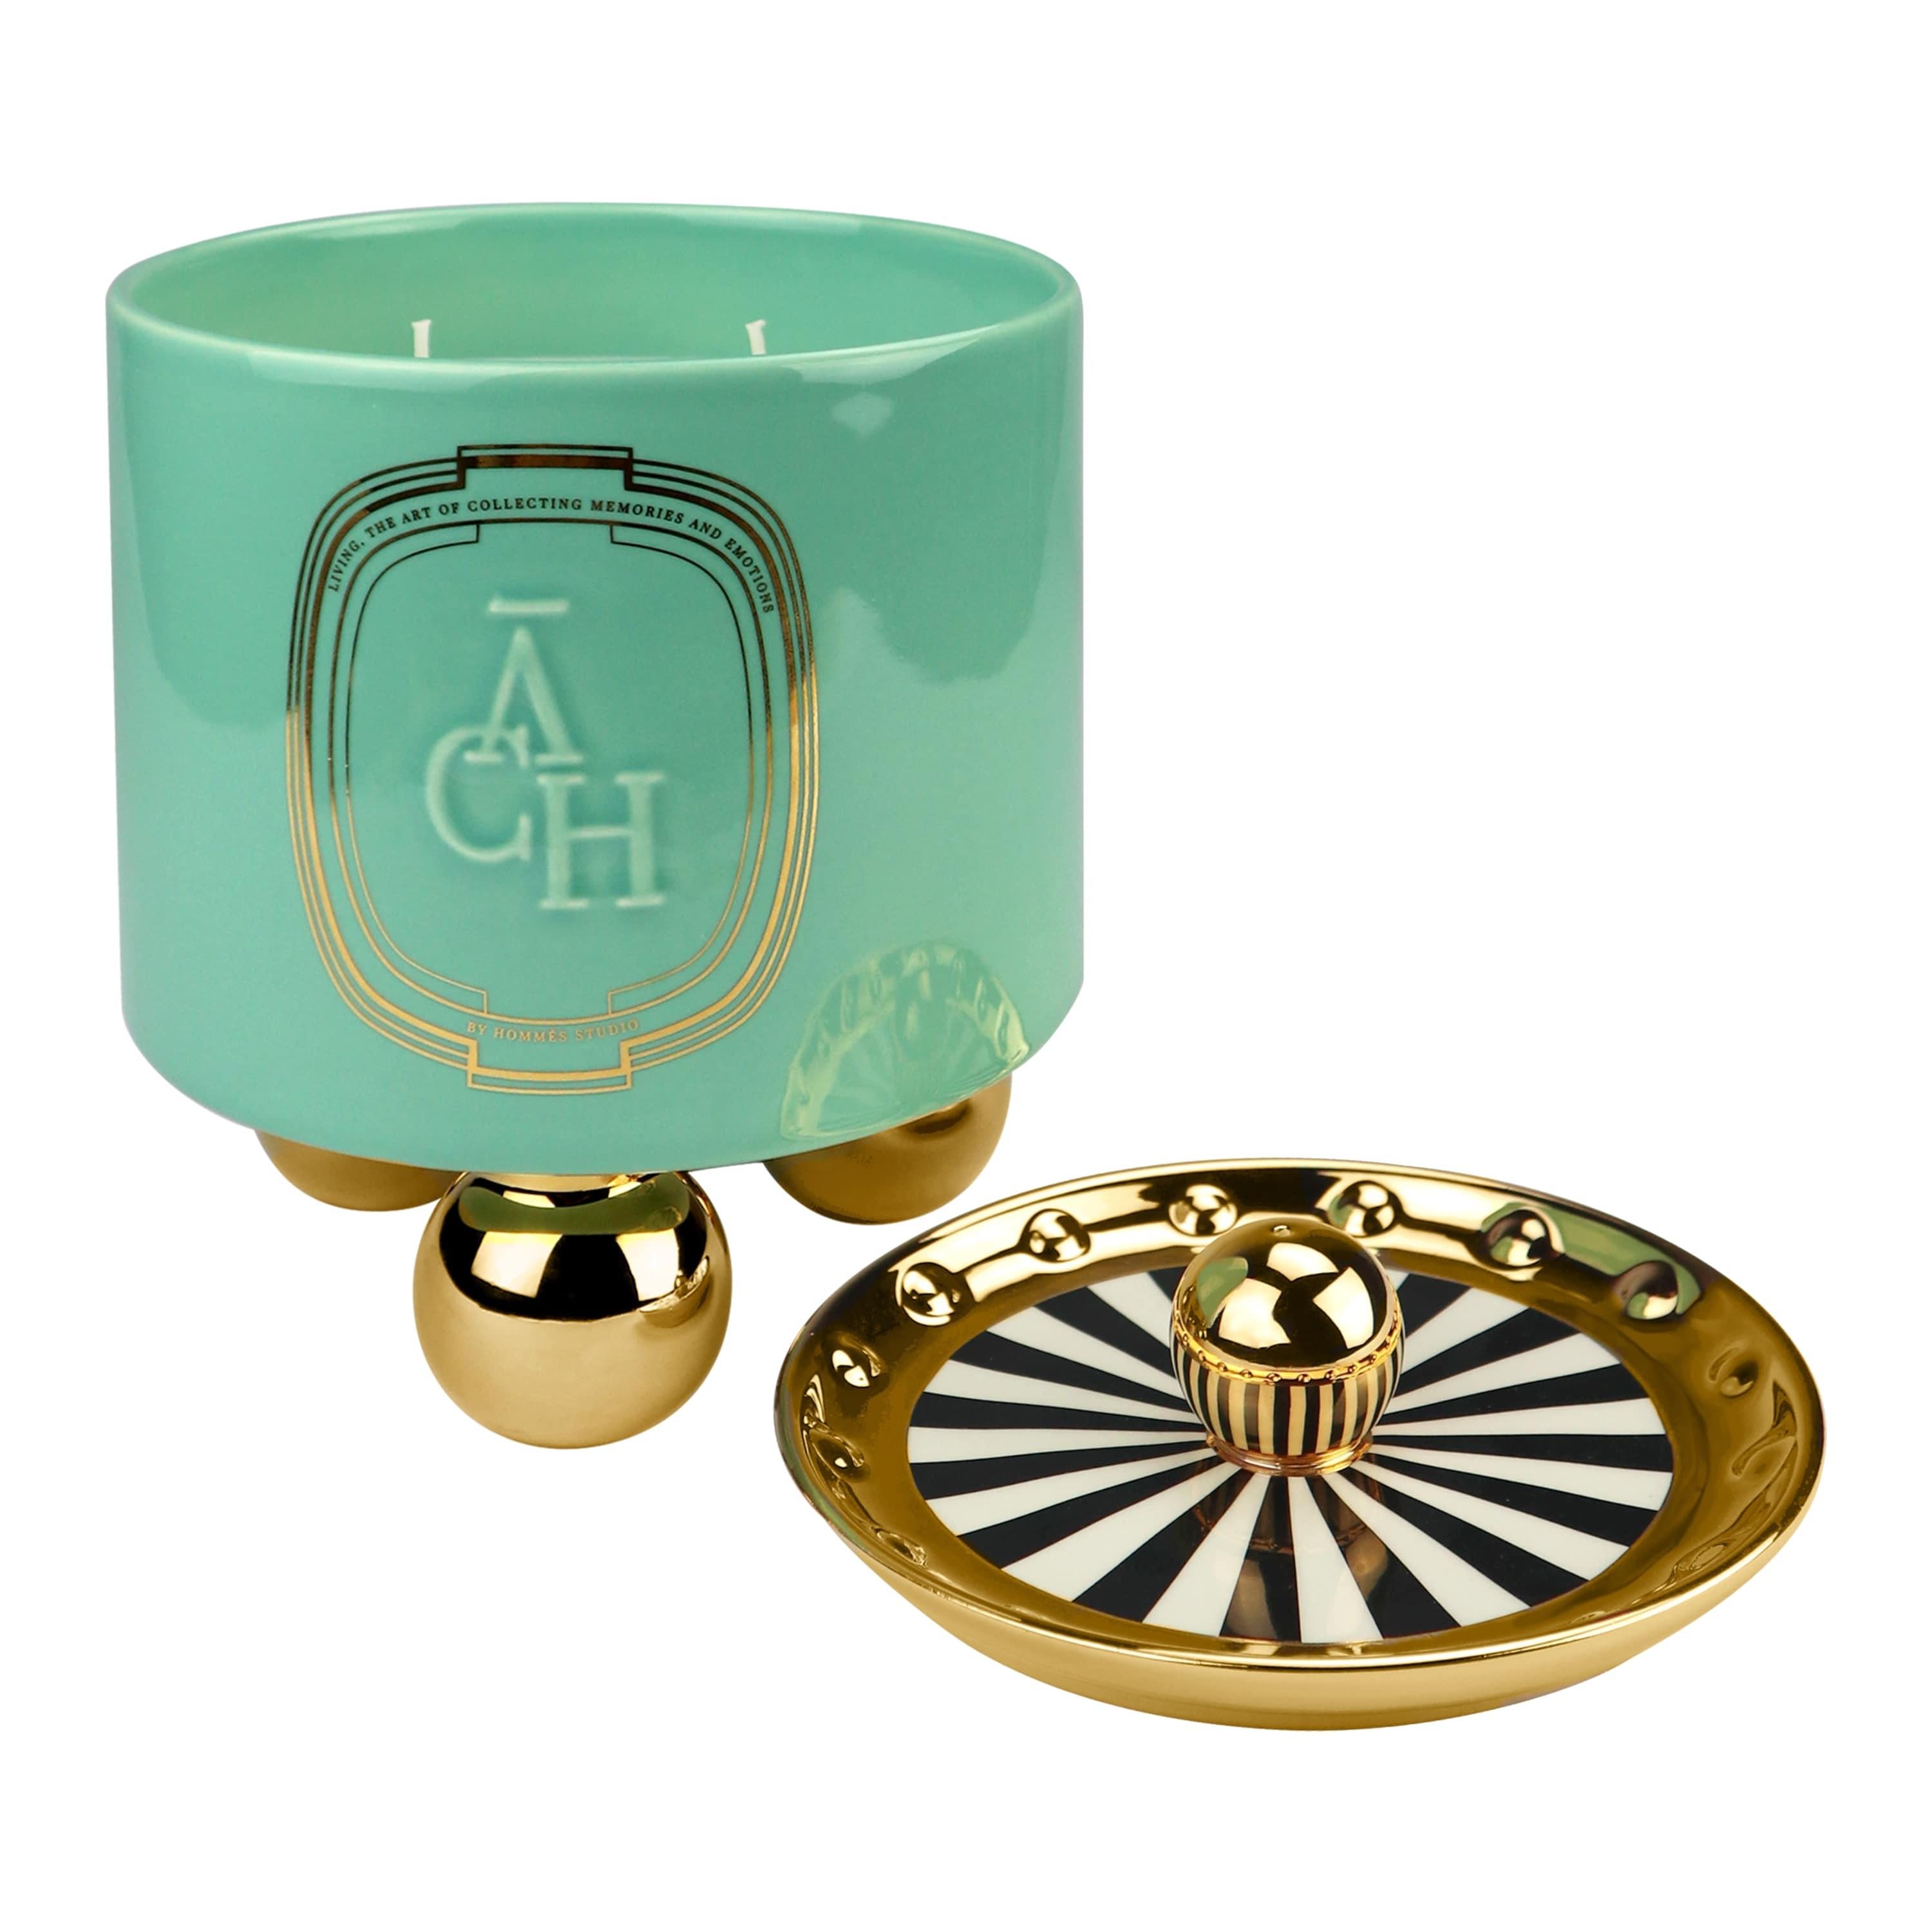 Candle Bois Oud Scented, Green Ceramic Candleholder Natural Fragrance, In Stock

Achi candle releases a hypnotic perfume adding extra value to a space thanks to its eye-catching container design. The natural composition of scents promises to excite